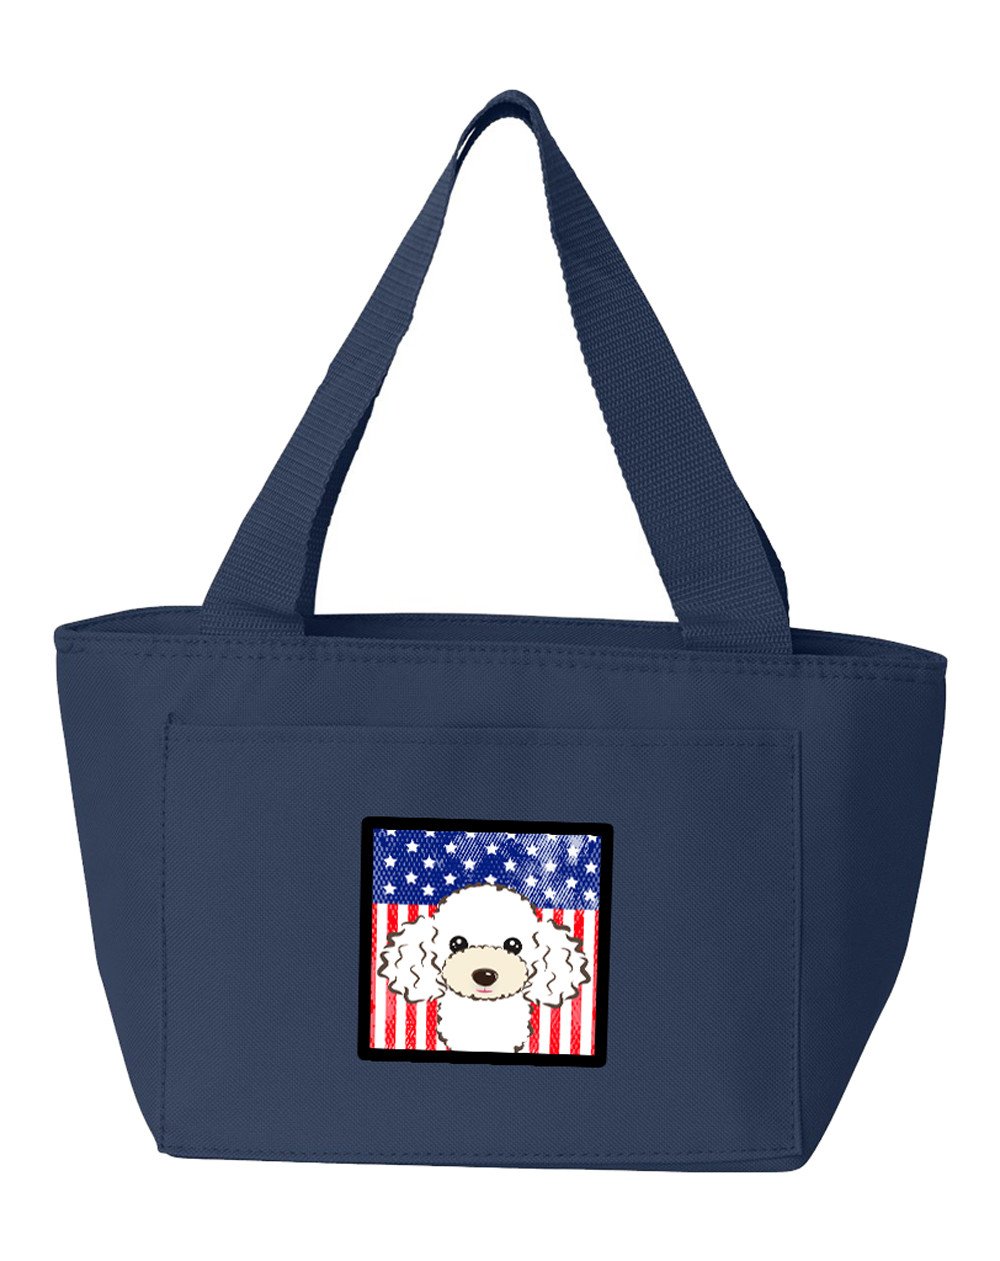 American Flag and White Poodle Lunch Bag BB2187NA-8808 by Caroline's Treasures